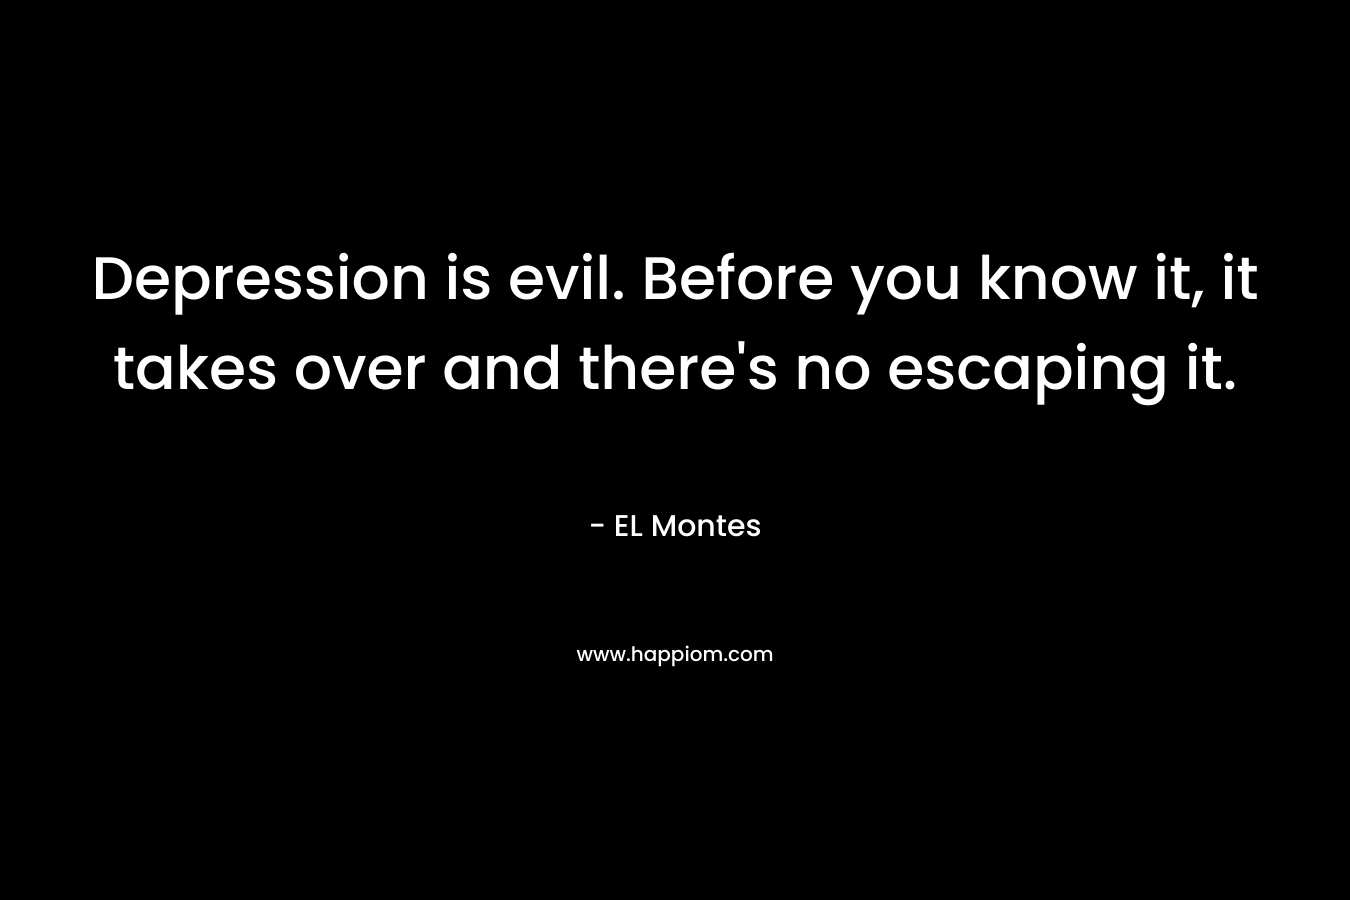 Depression is evil. Before you know it, it takes over and there’s no escaping it. – EL Montes